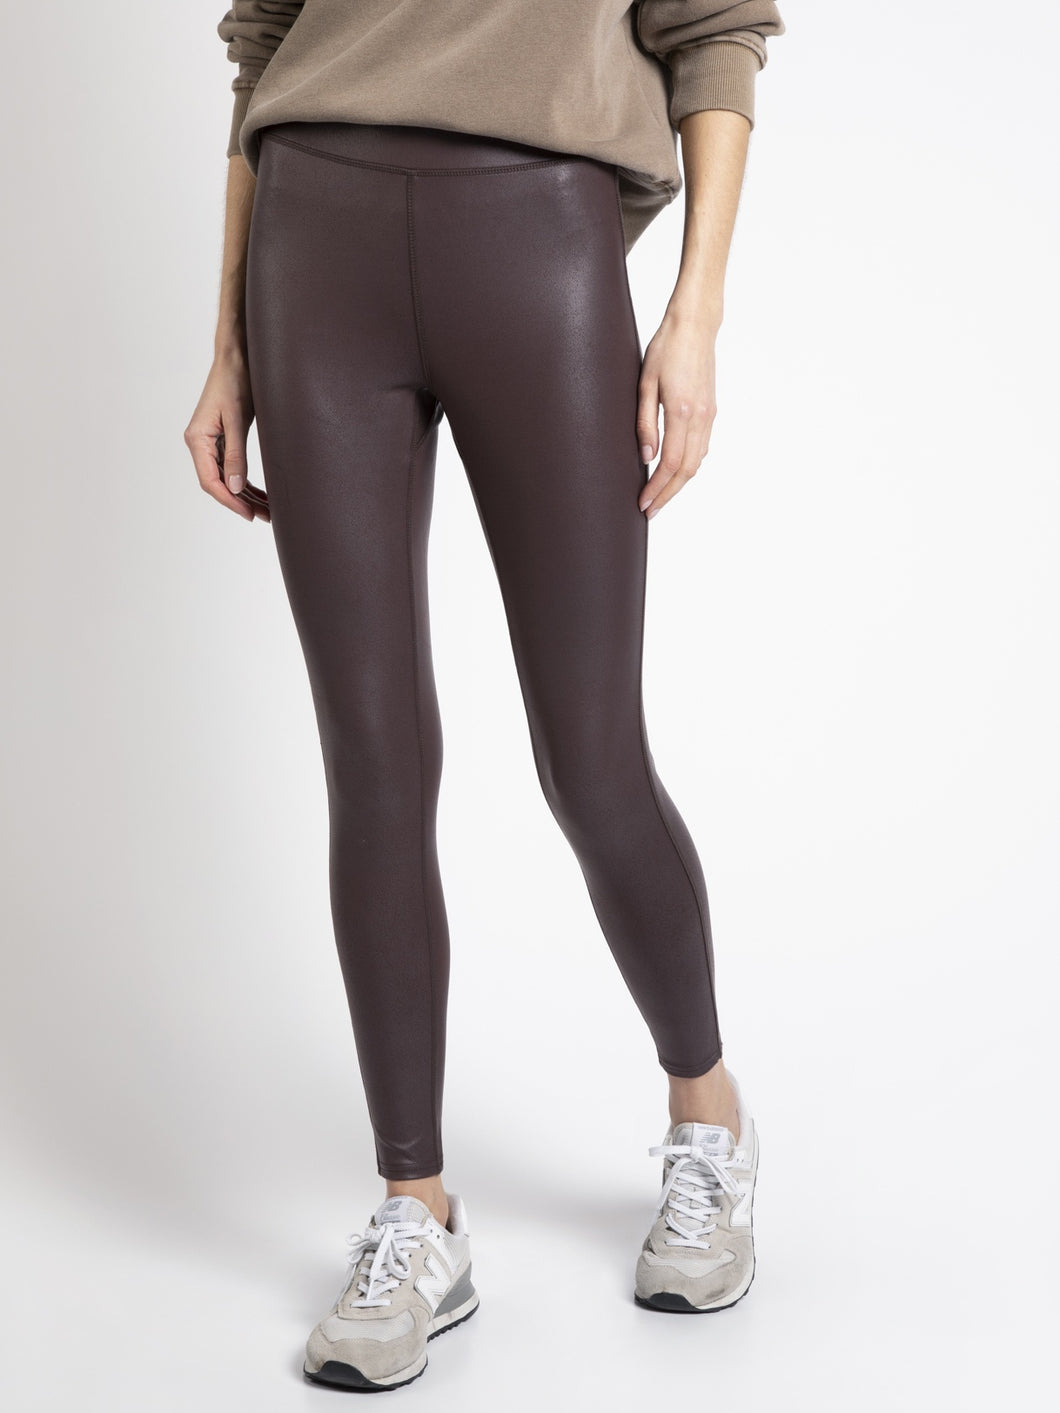 Take A Risk Leggings  Ava Lane Boutique - Women's clothing and